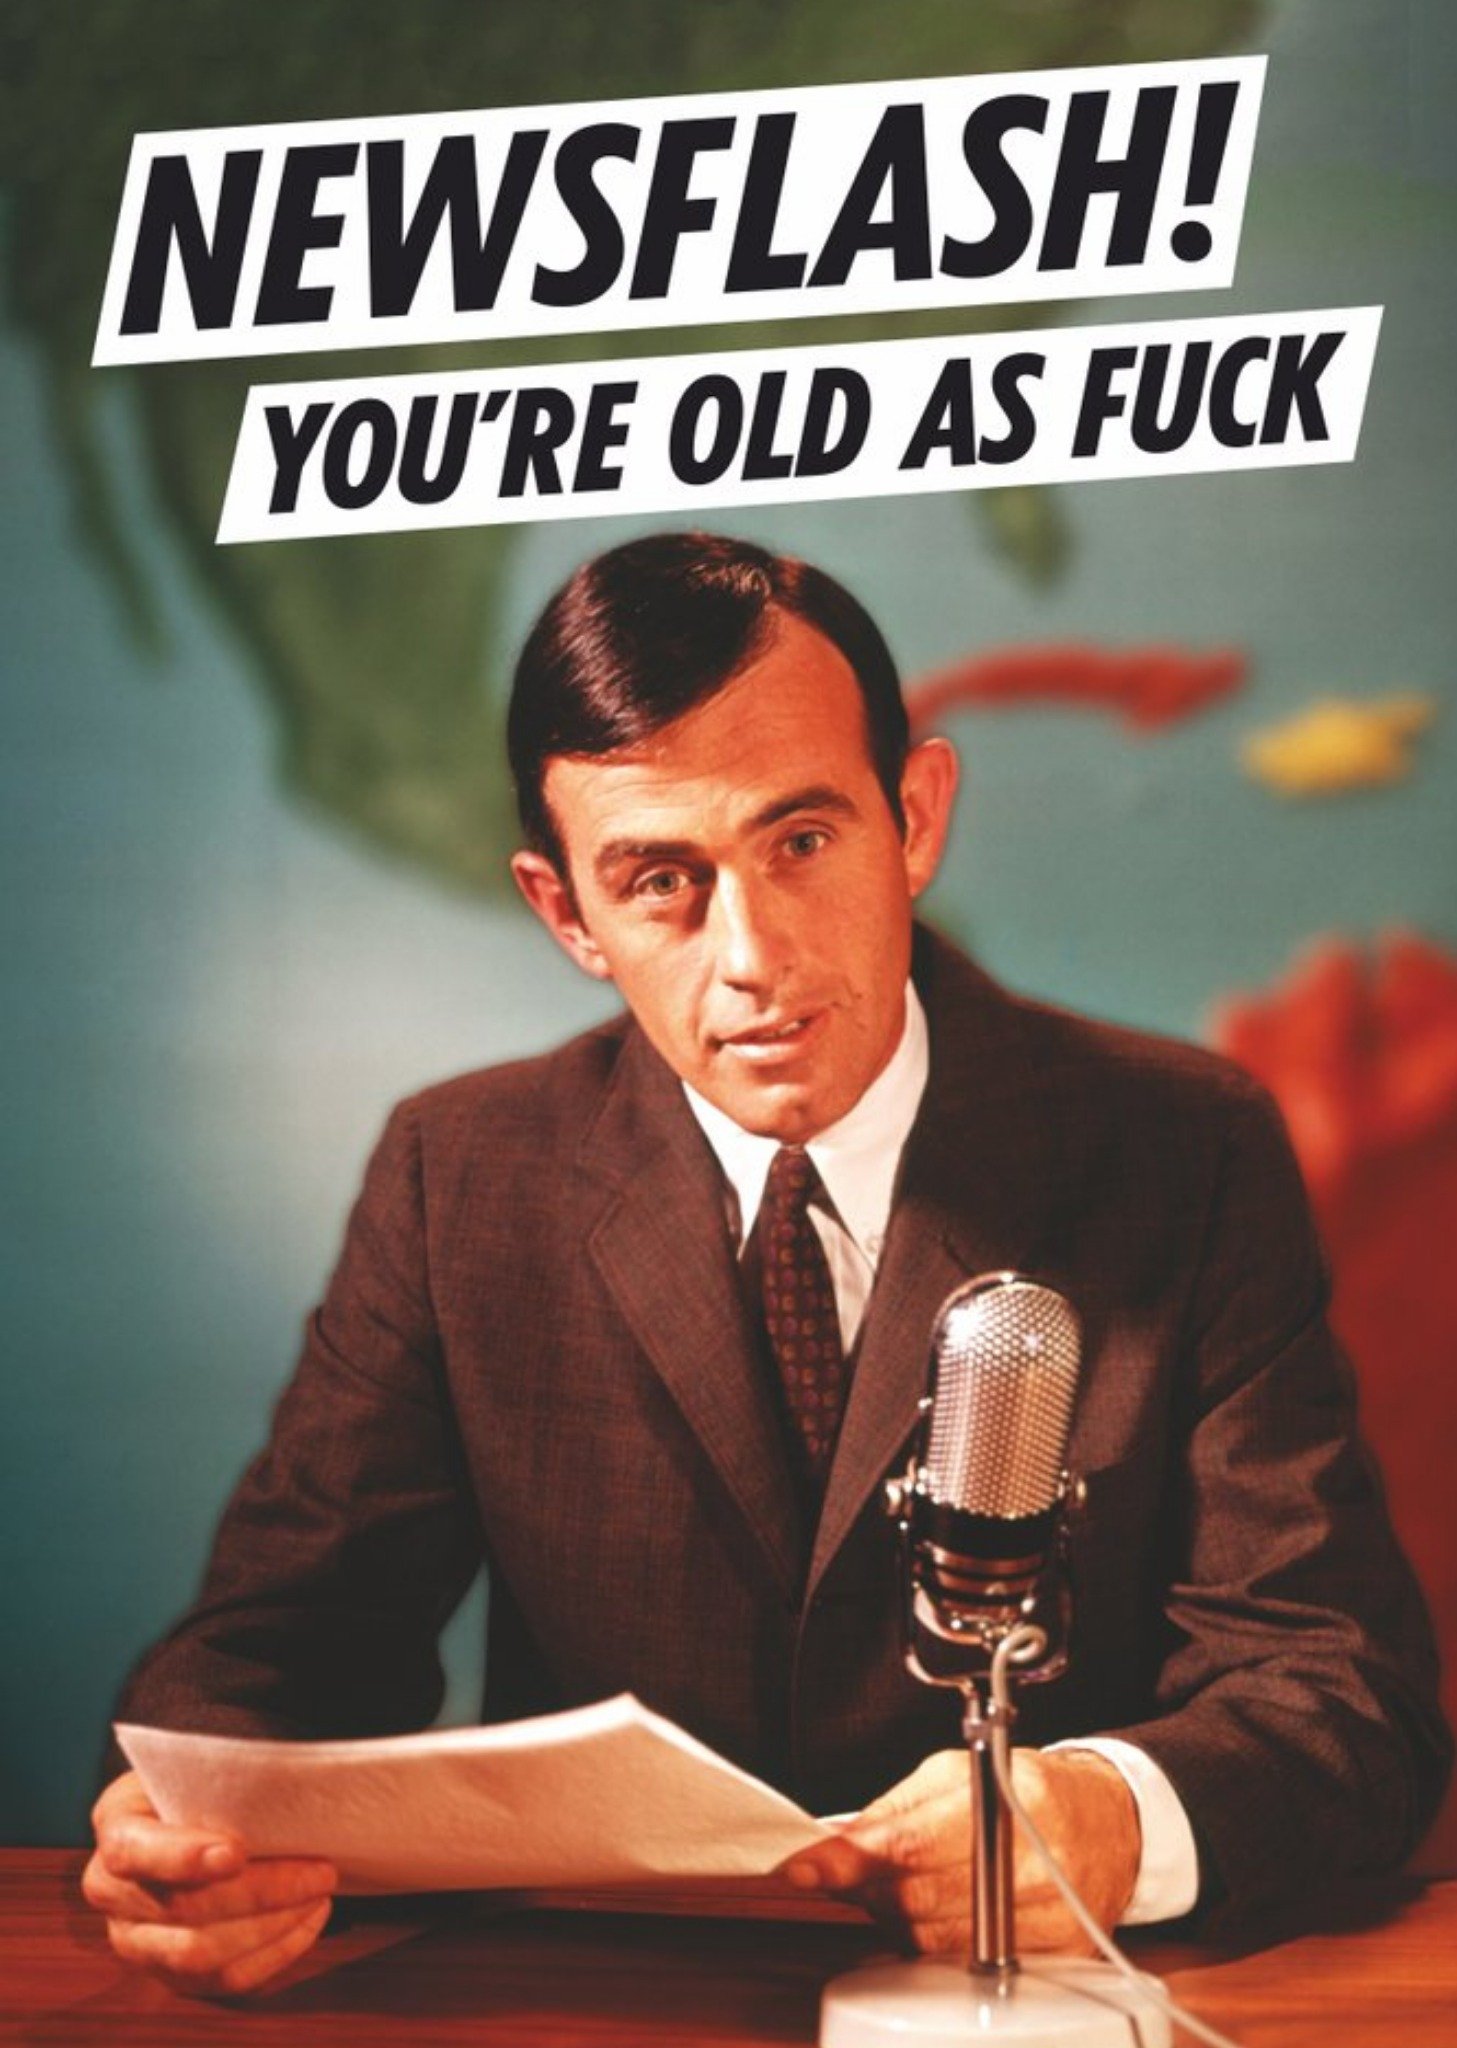 Moonpig Dean Morris News Flash You're Old As Fuck Birthday Card, Large